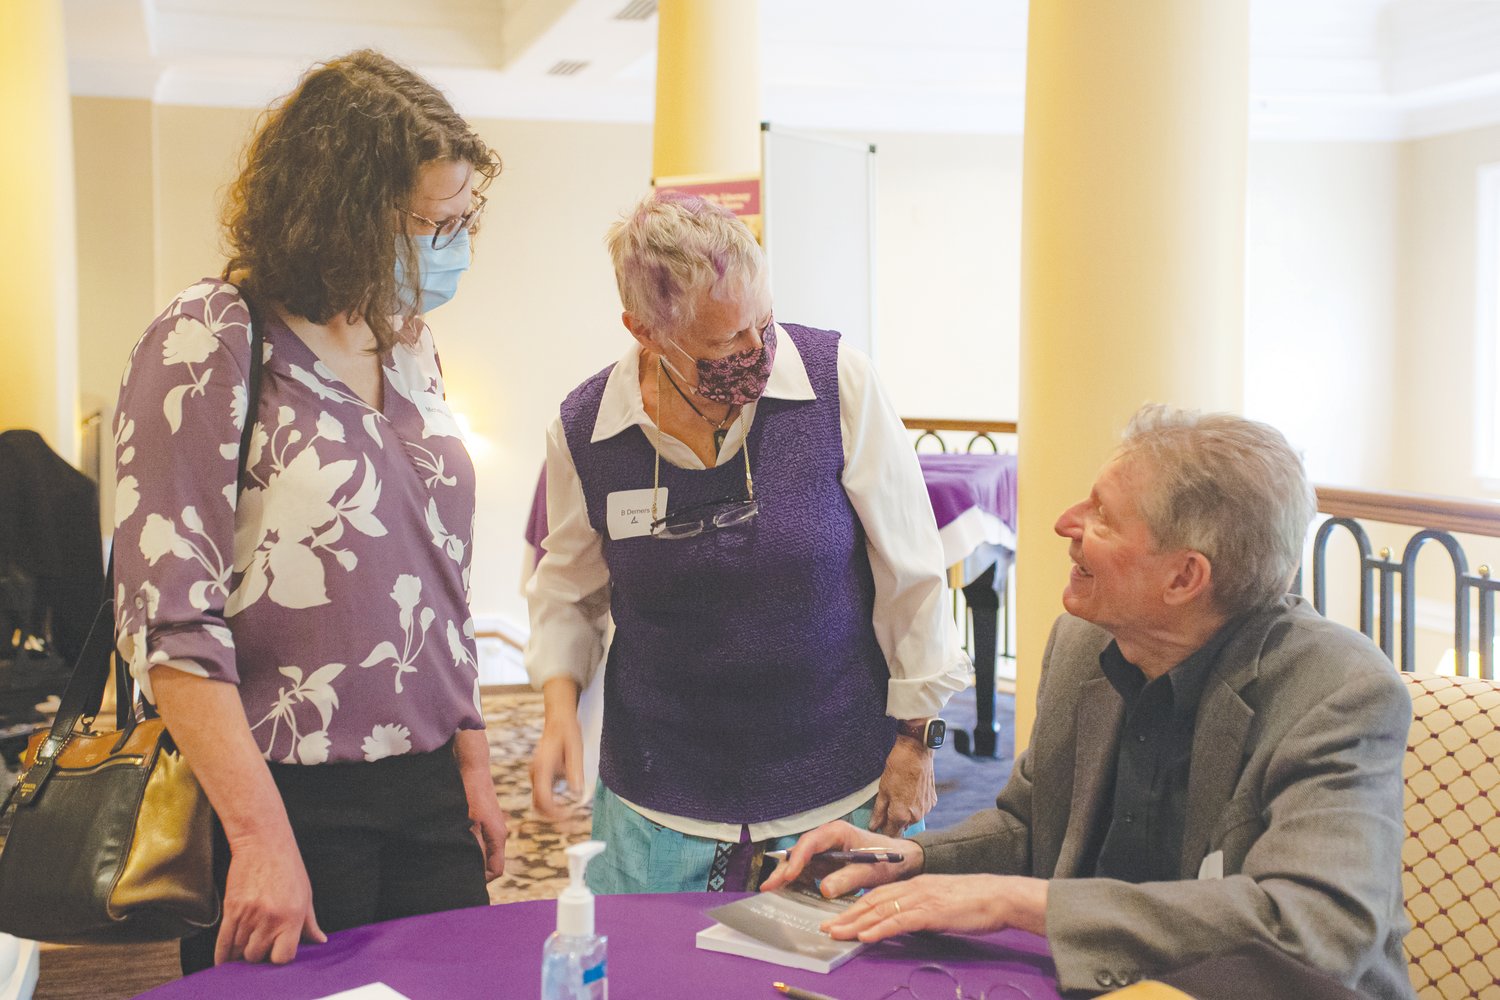 John Rosenthal chats with two attendees of Chatham Literacy's spring fundraiser. Rosenthal, a celebrated photographer, recently published 'Searching for Amylu Danzer,' a critically-acclaimed memoir.